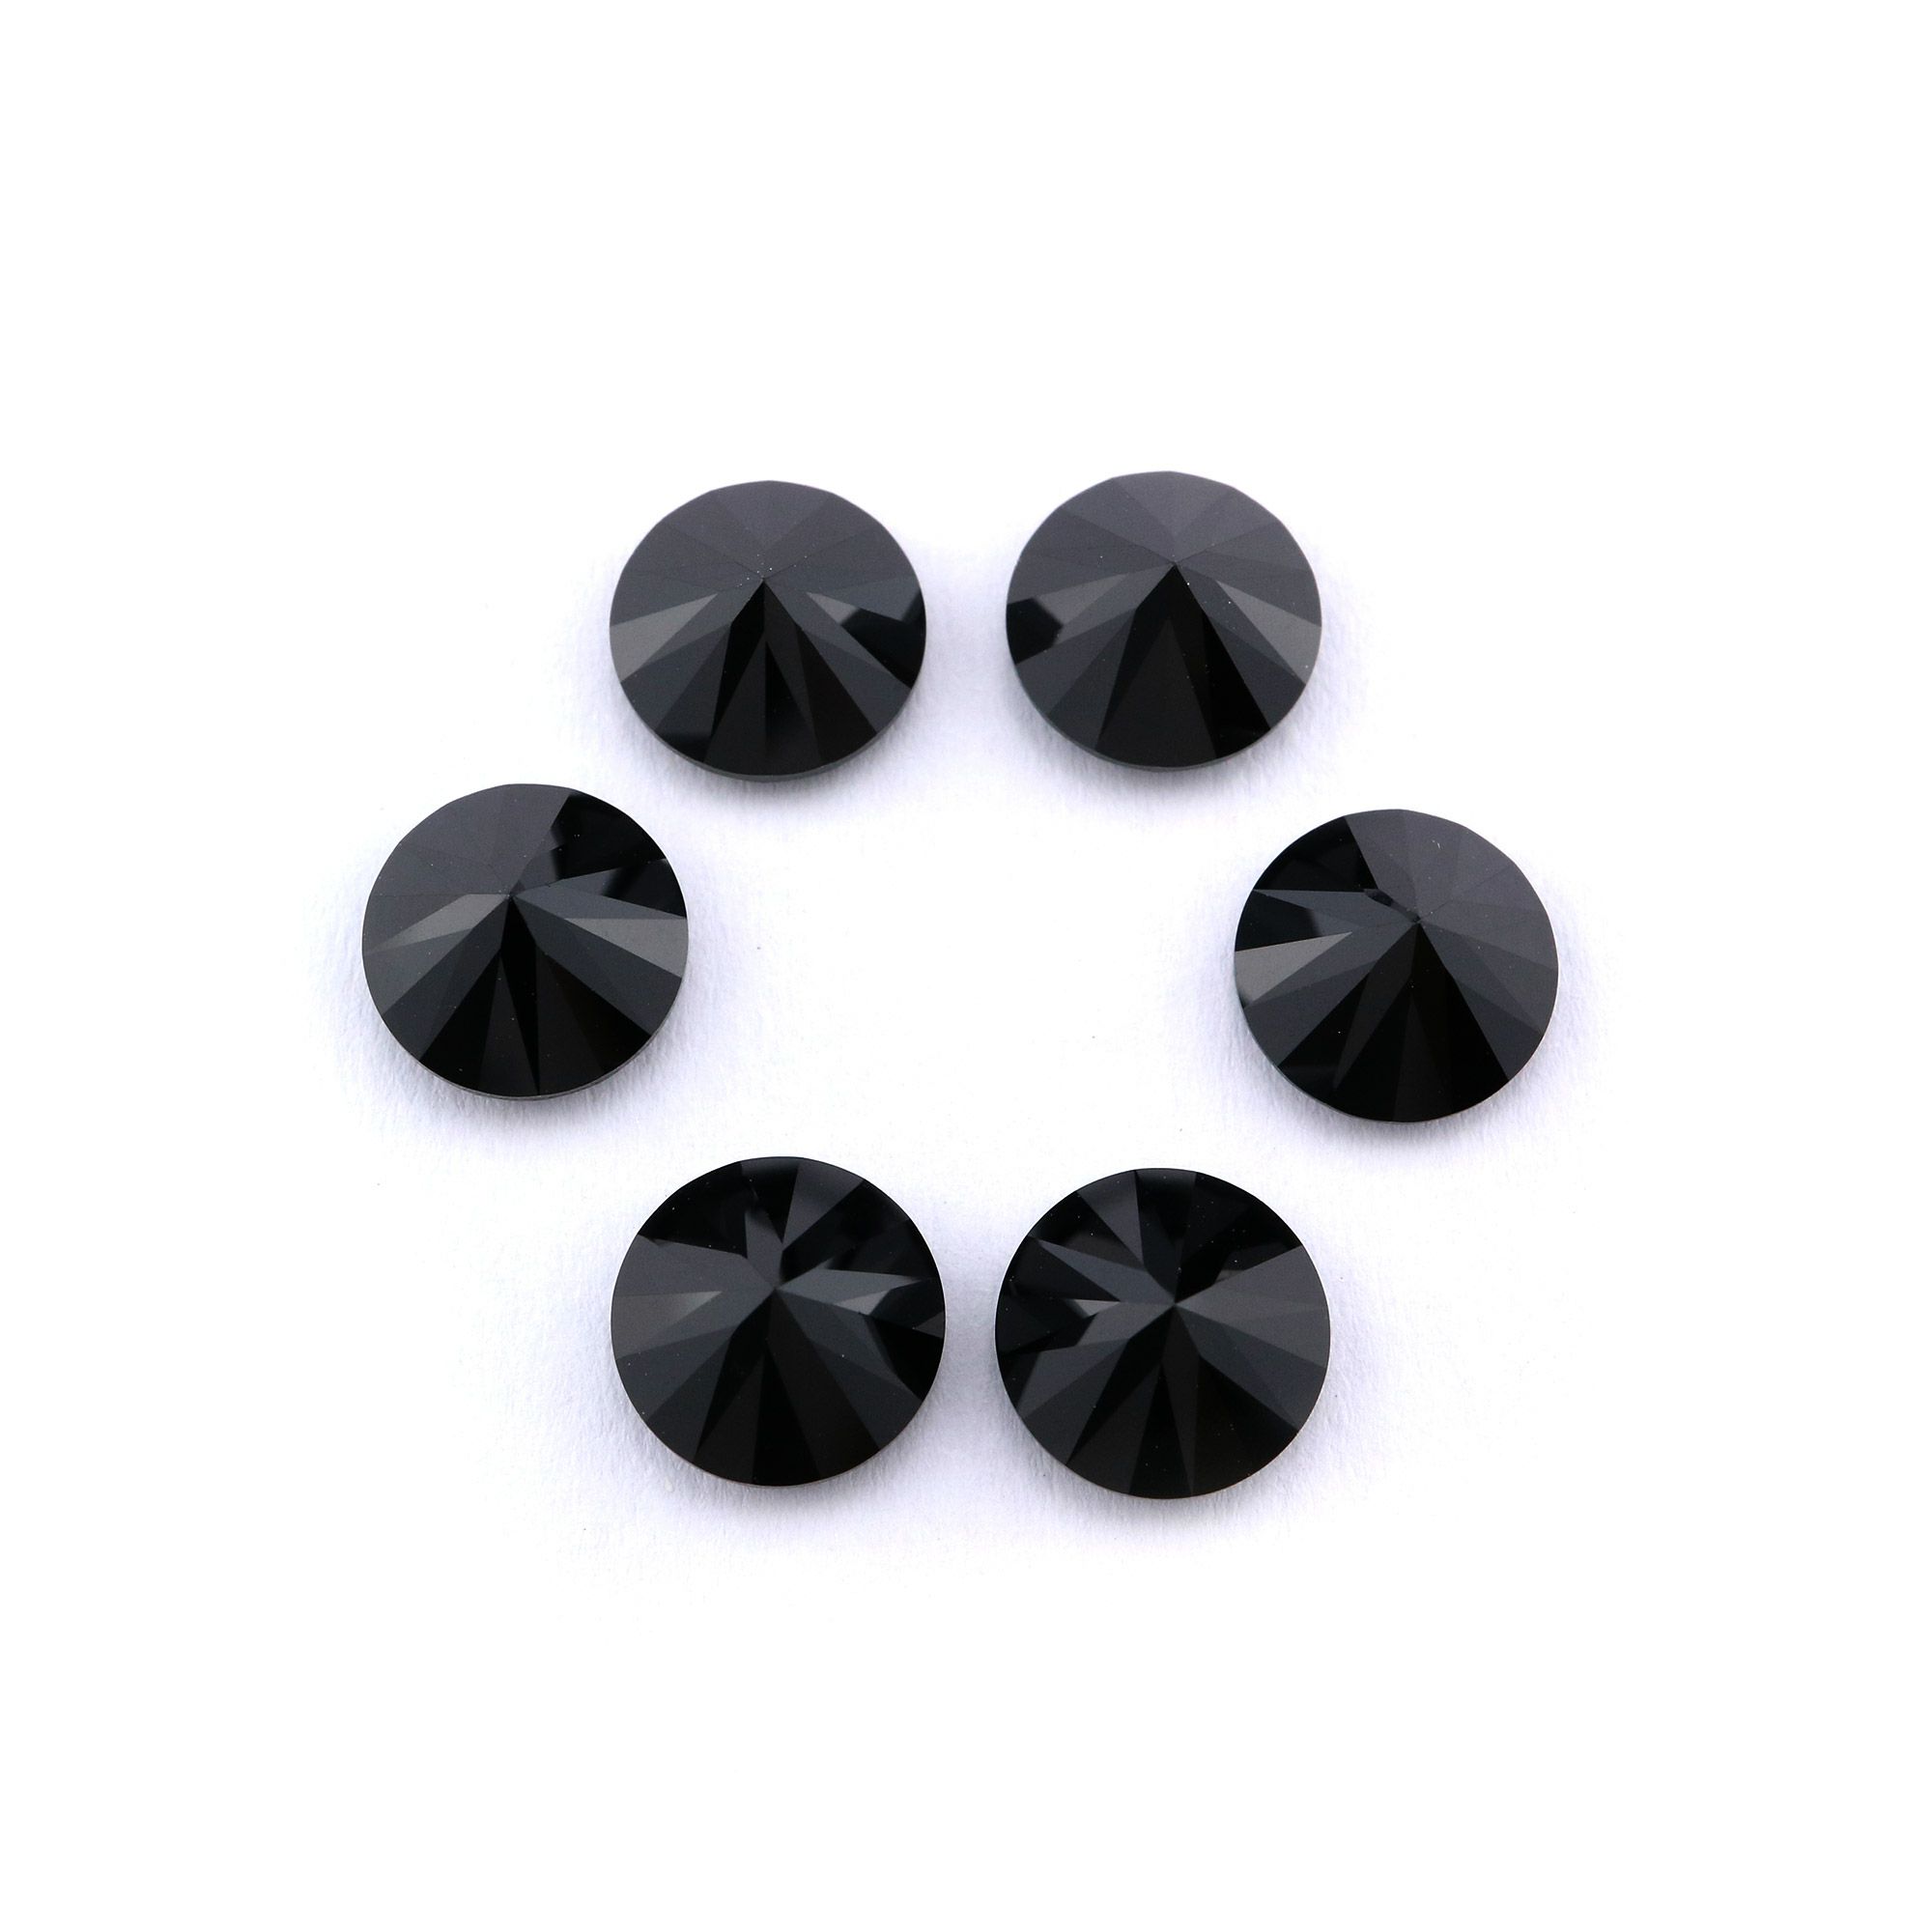 5Pcs 1-9MM Round Black Spinel Faceted Cut Loose Gemstone Natural Semi Precious Stone DIY Jewelry Supplies 4110164 - Click Image to Close